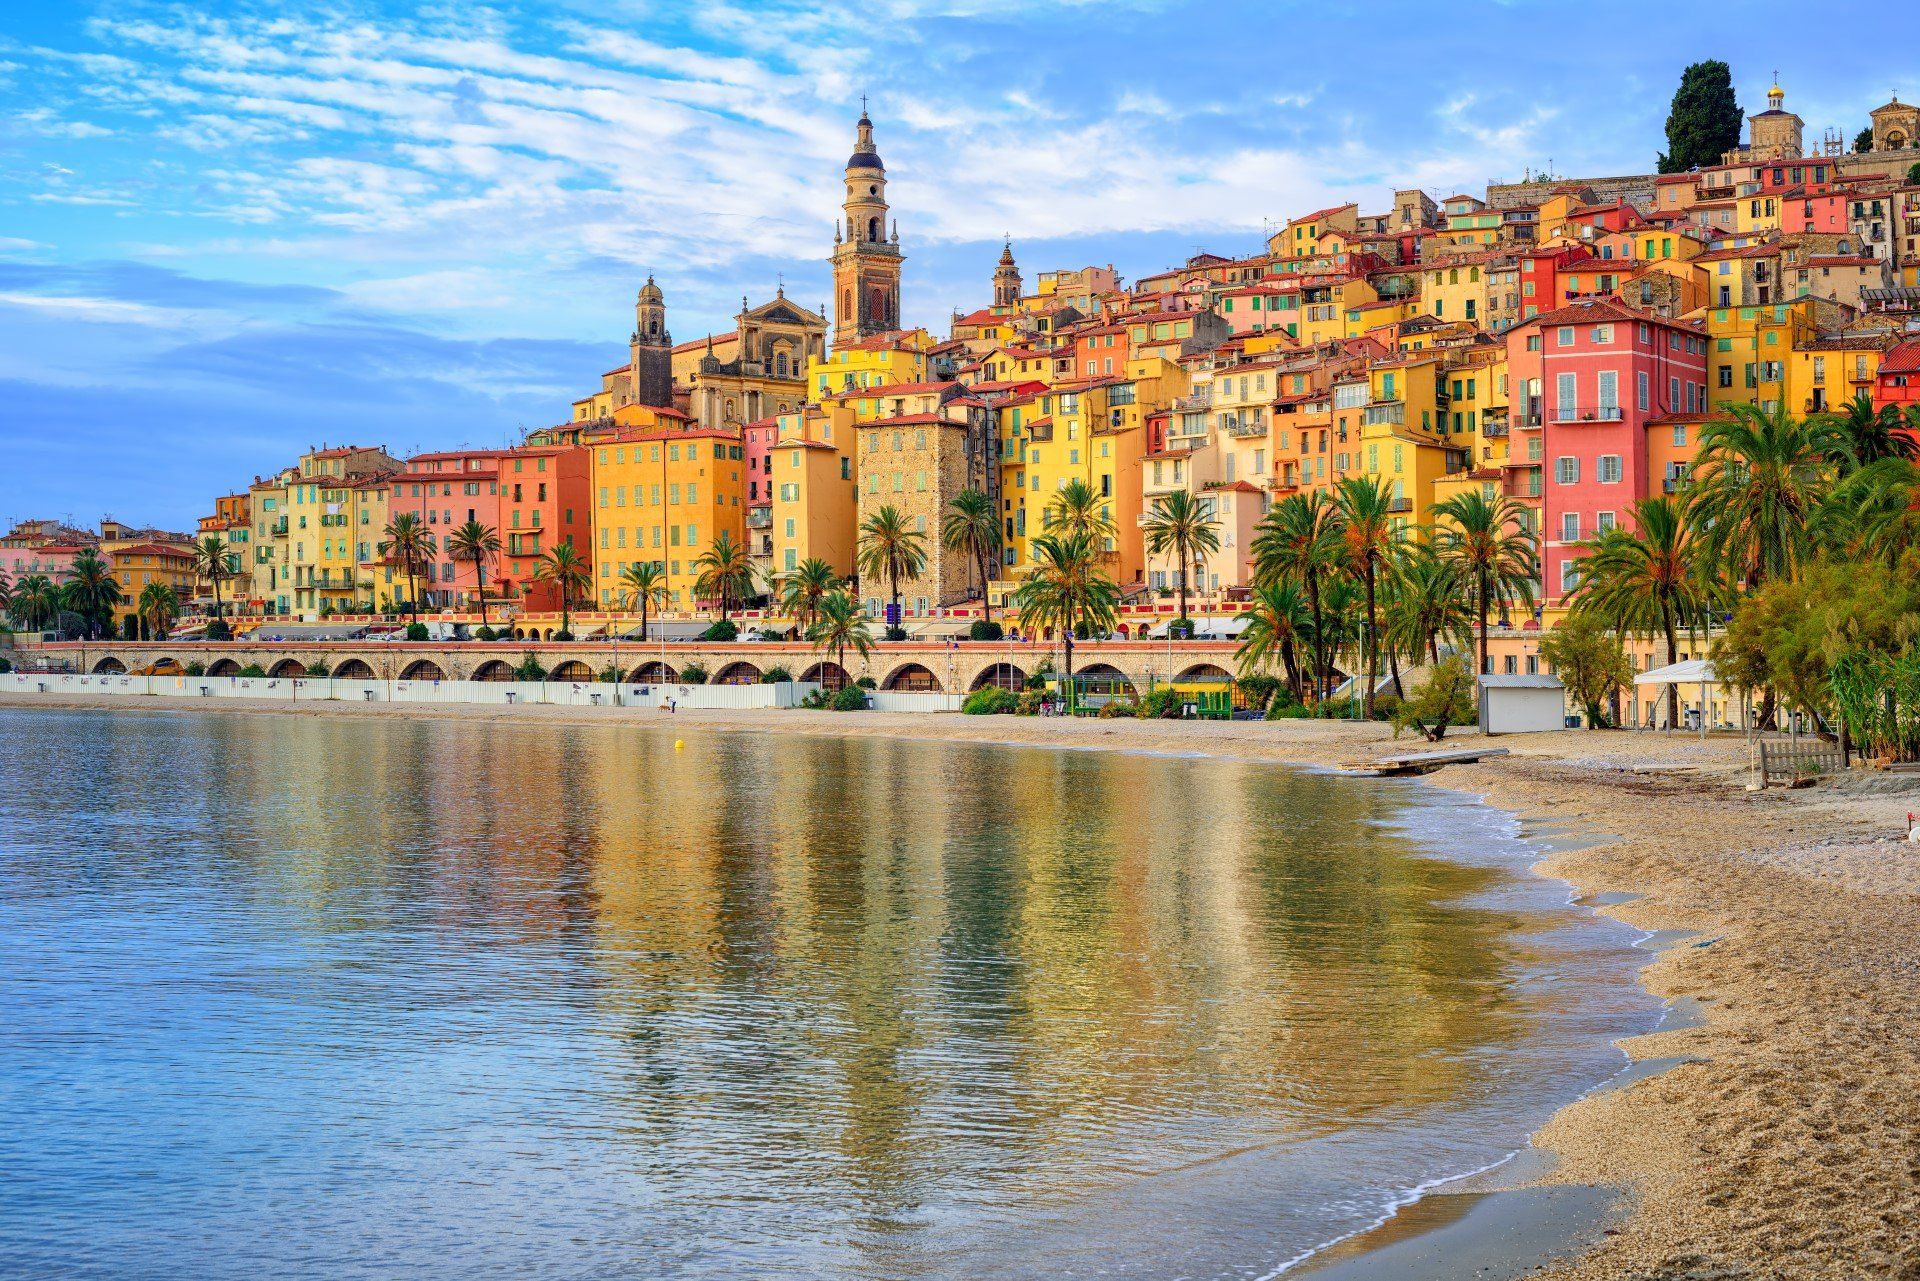 Travel back in time with a visit to the charming medieval town of Menton on the French Riviera